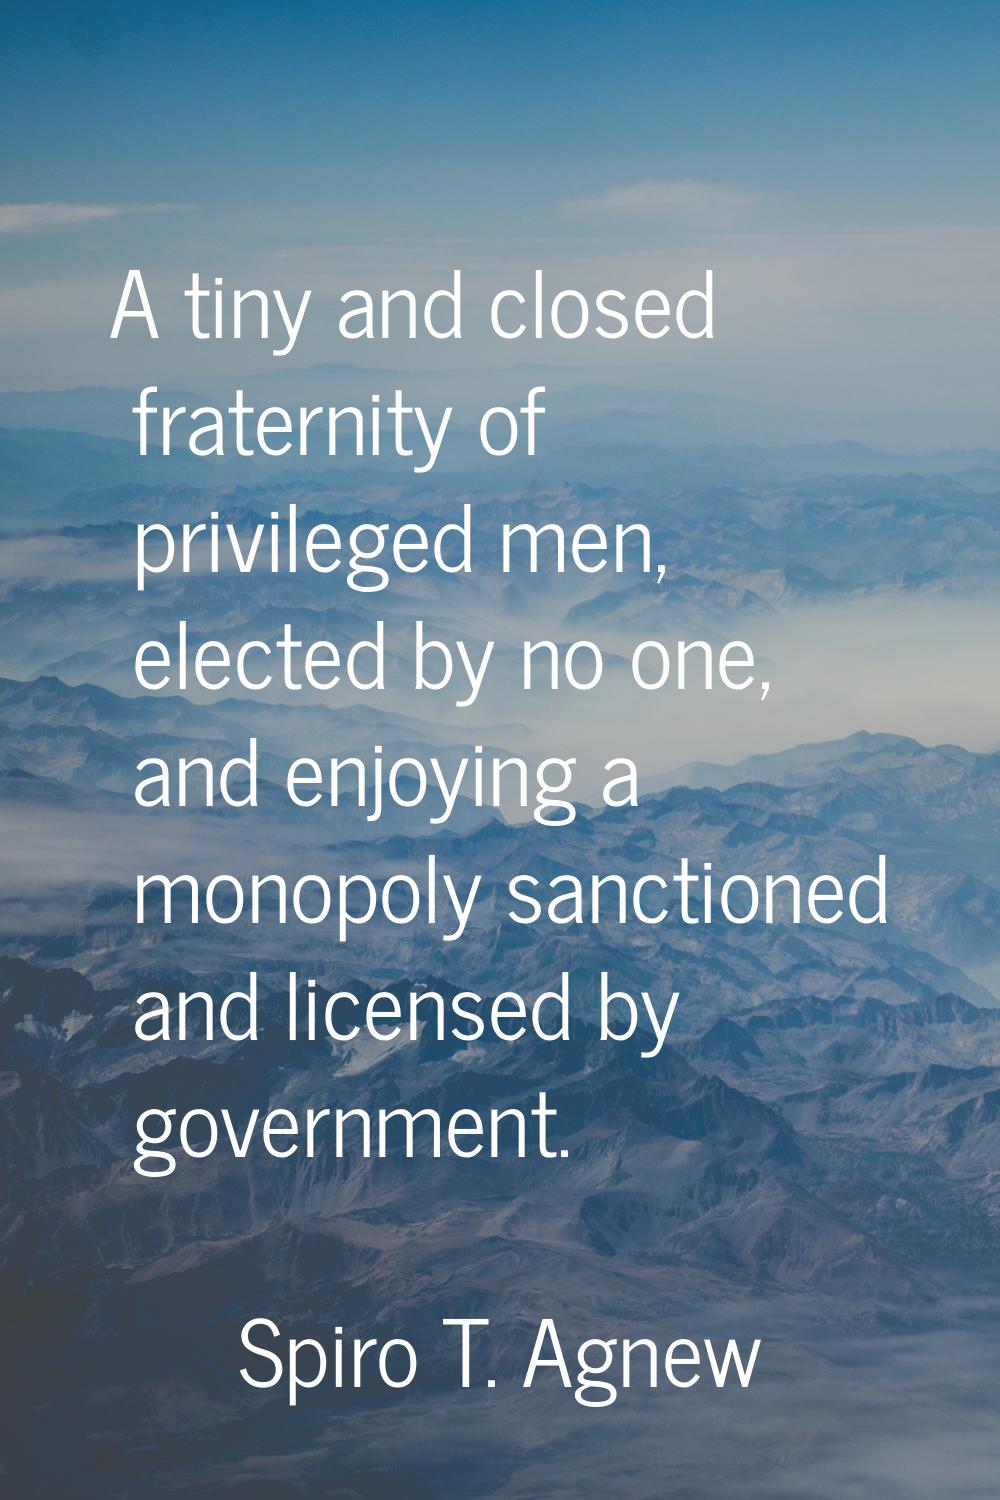 A tiny and closed fraternity of privileged men, elected by no one, and enjoying a monopoly sanction